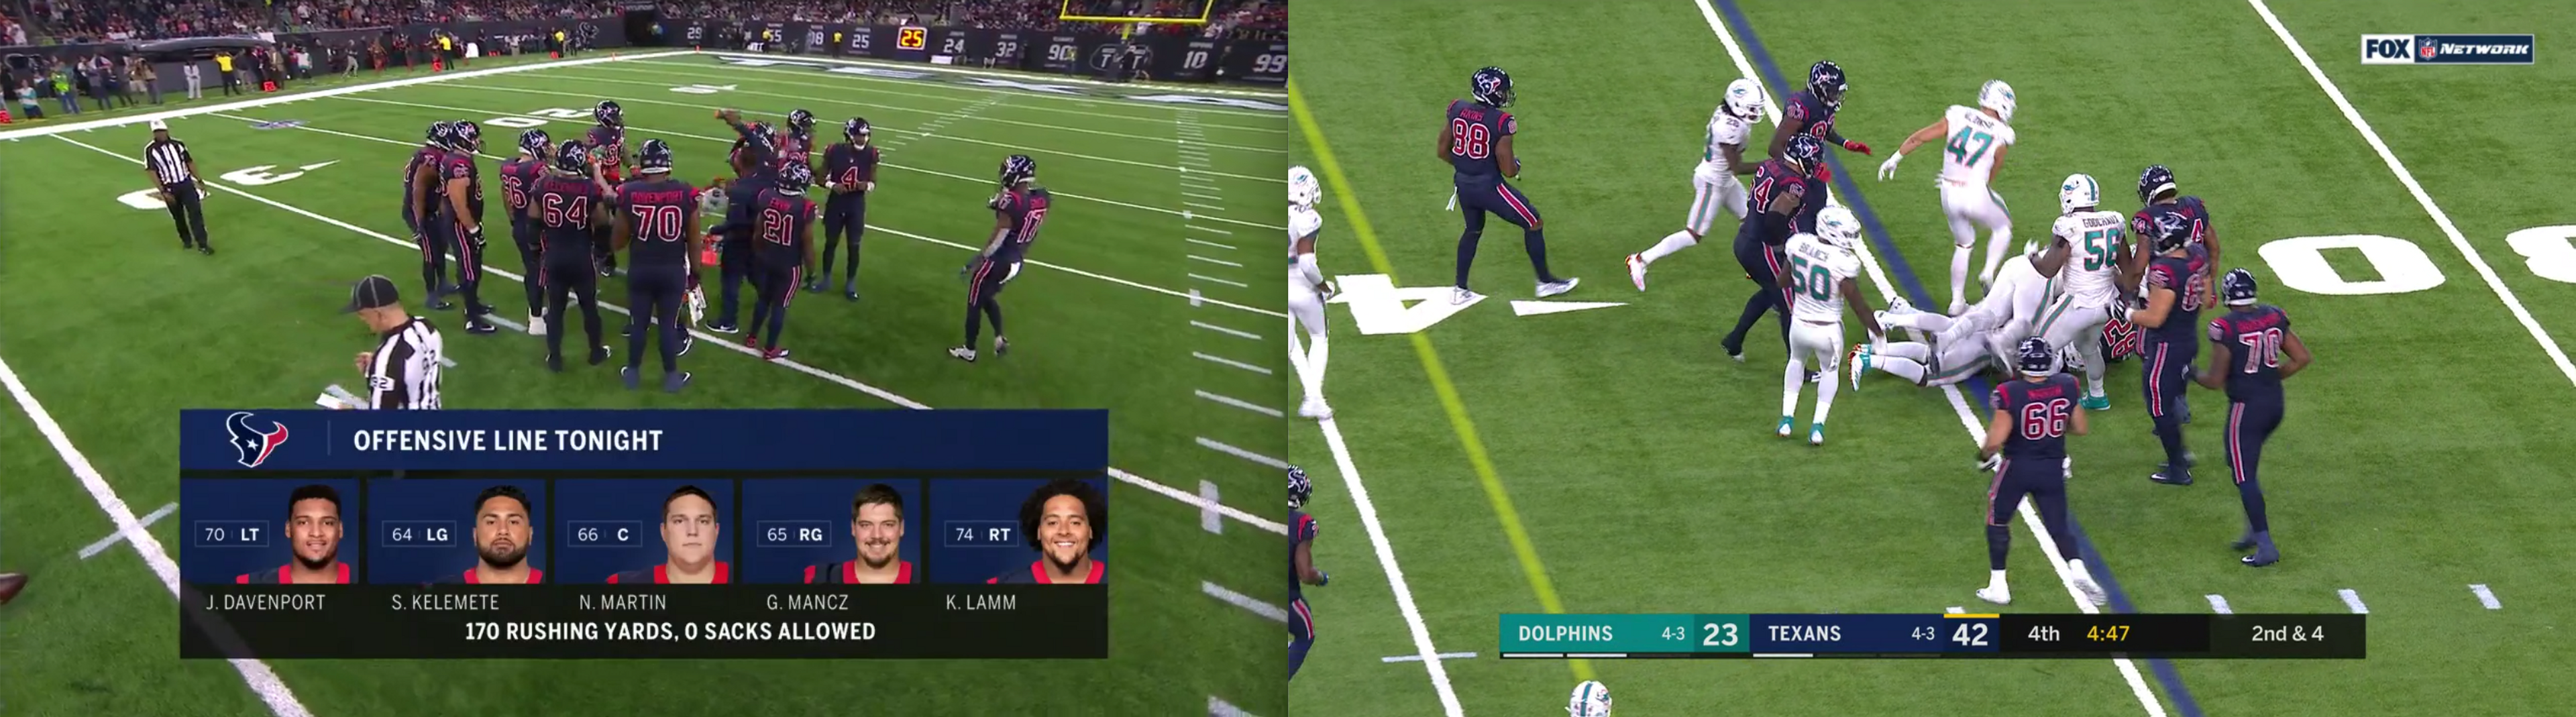 Screenshot showing two frames from the same football game side-by-side